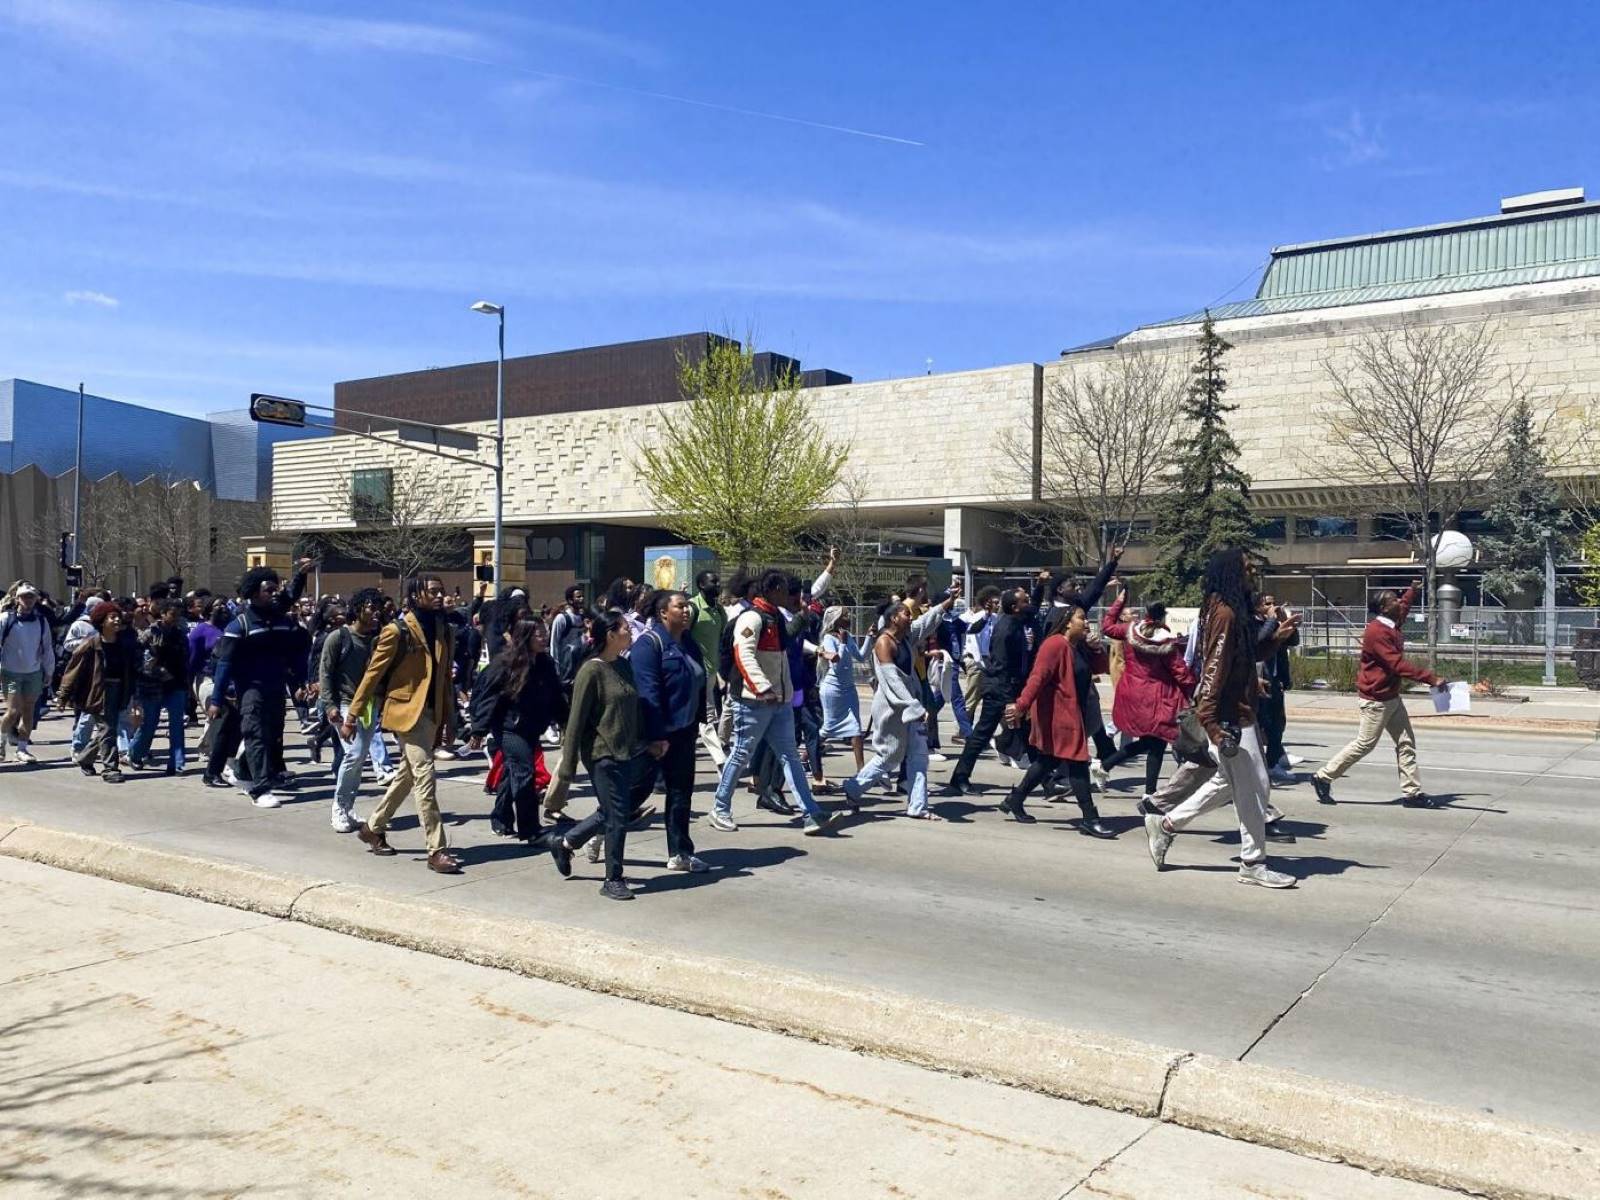 University Of Wisconsin-Madison Faces Controversial On-Campus Protesters: What's The Next Move?